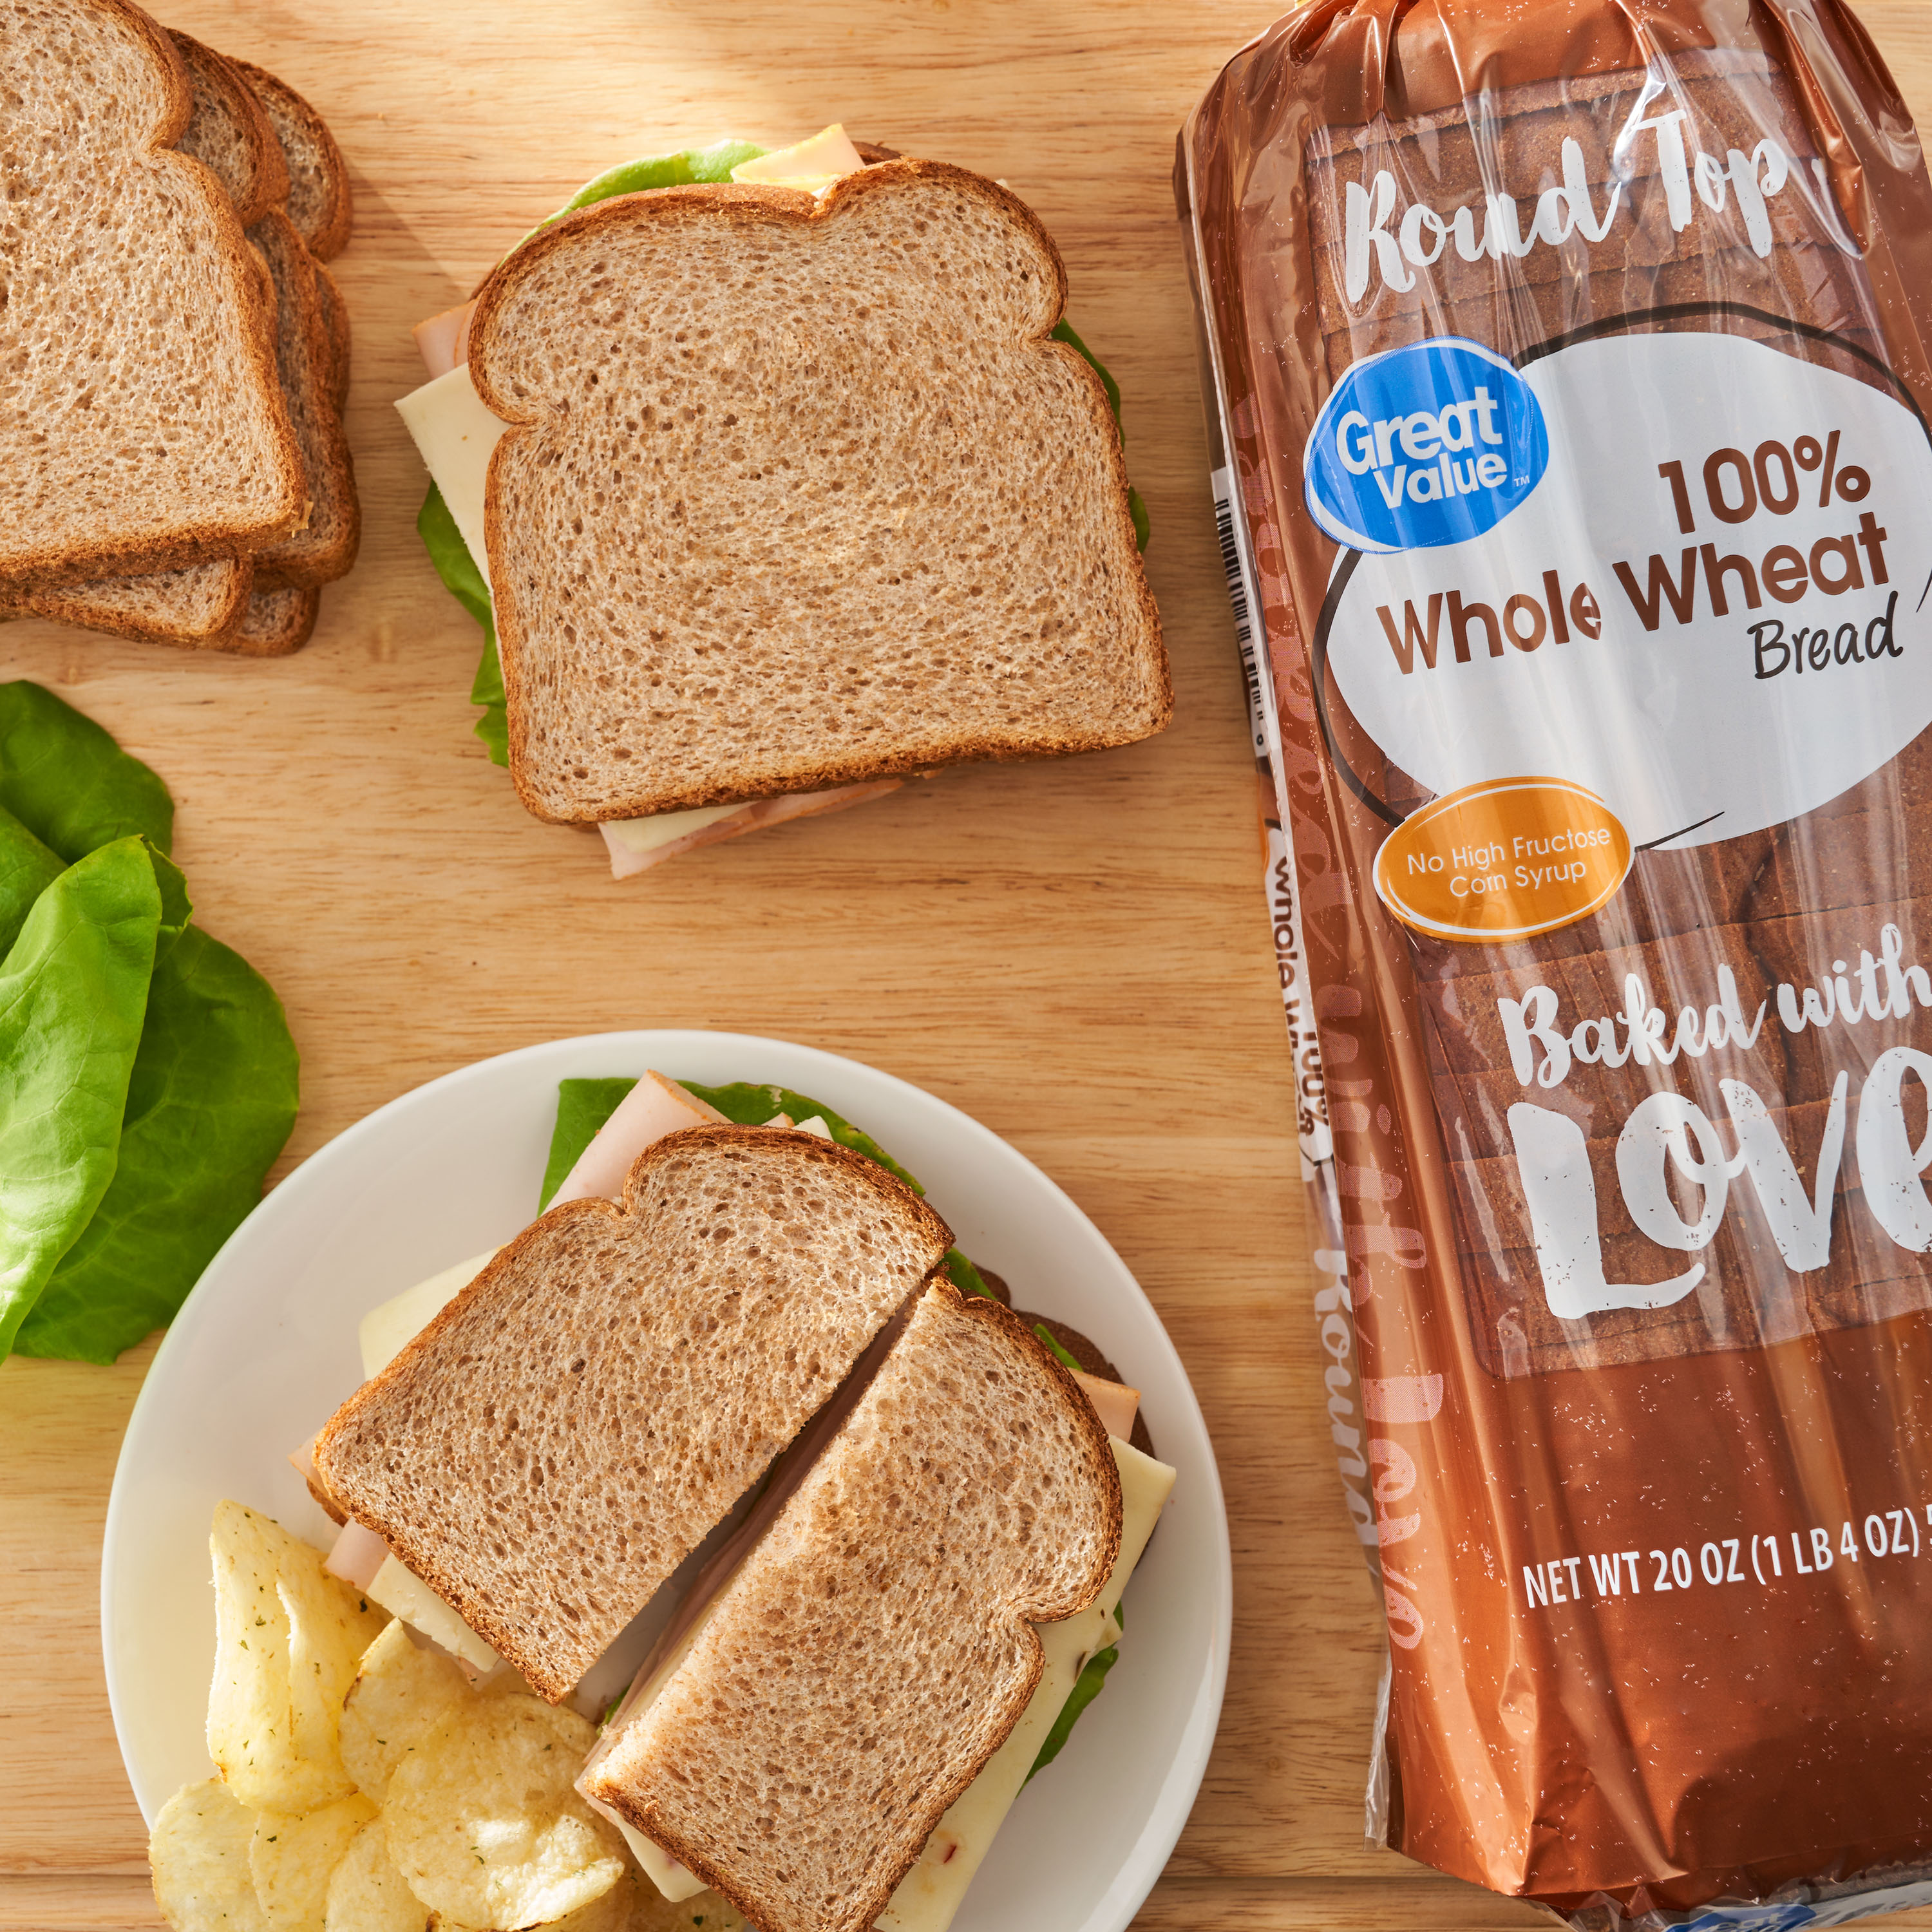 Great Value 100% Whole Wheat Round Top Bread, 20 oz - image 2 of 8